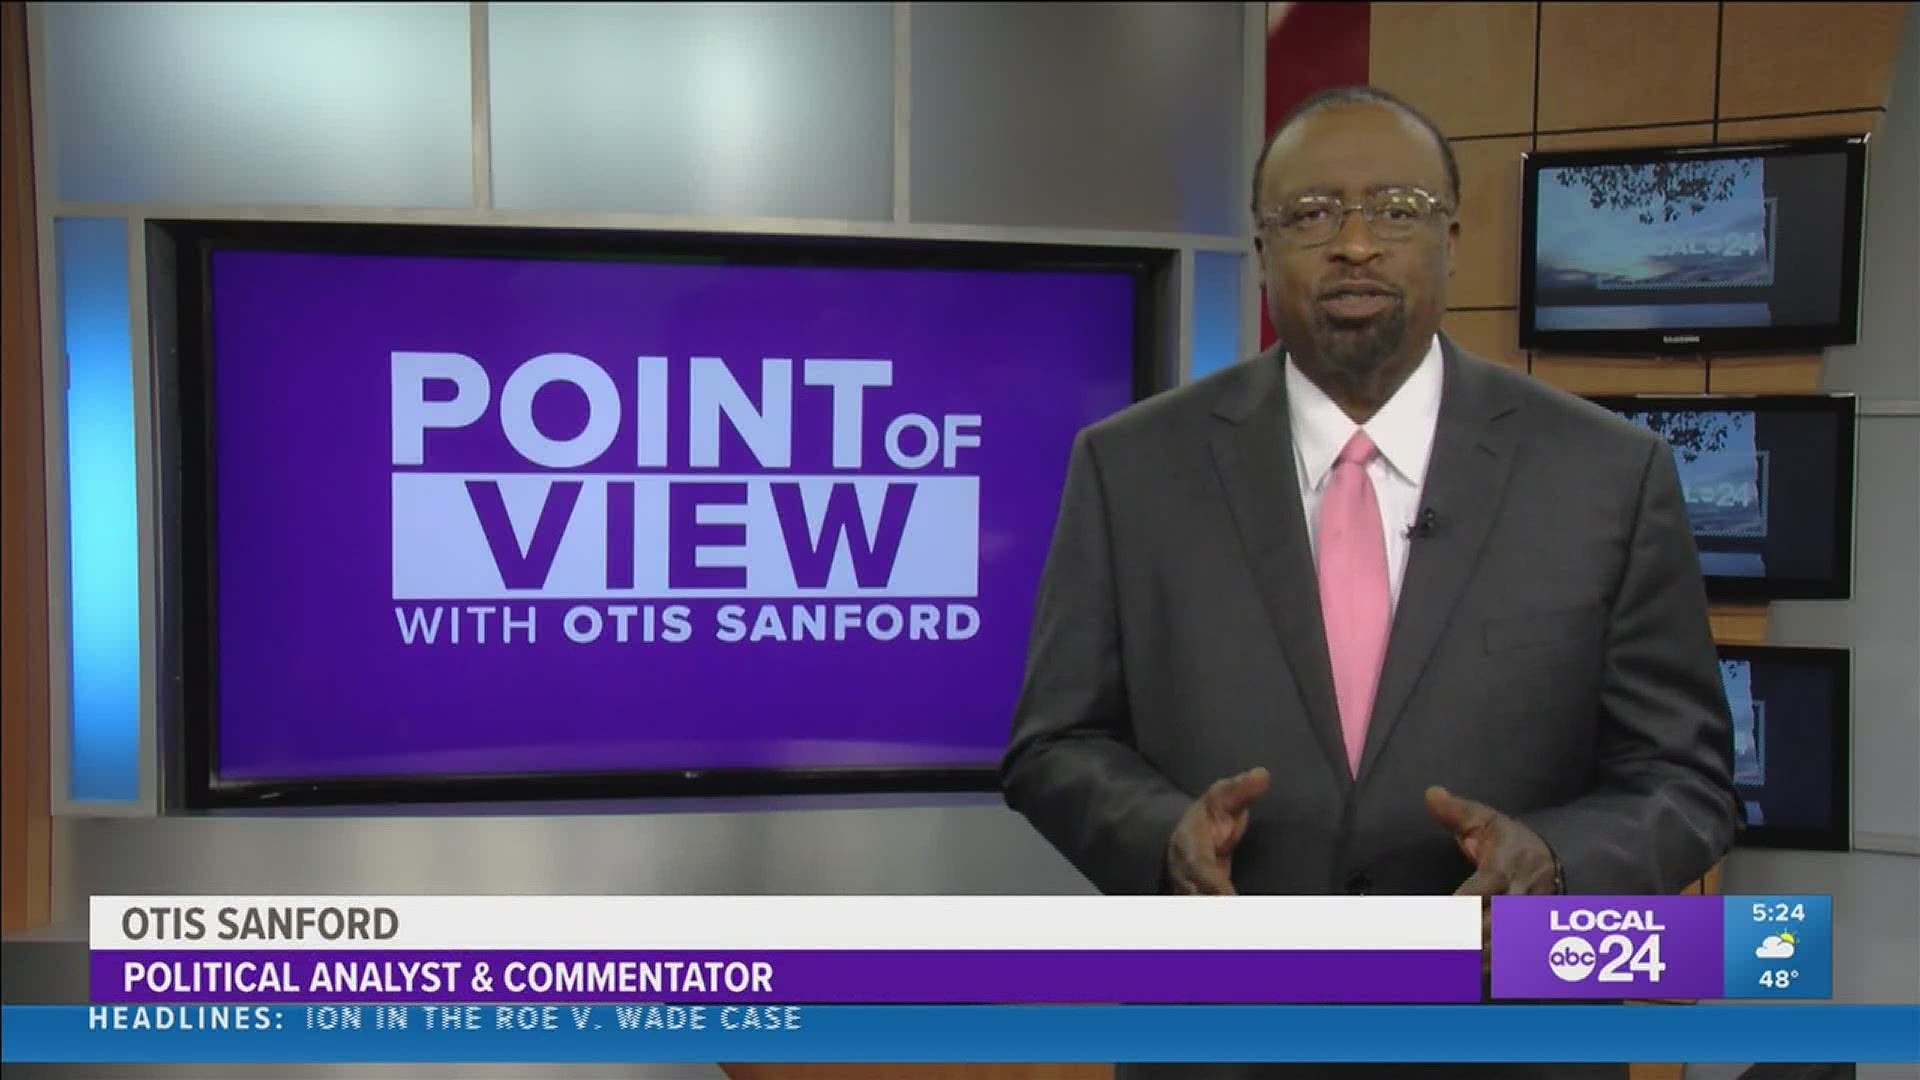 Local 24 News political analyst and commentator Otis Sanford shares his point of view on the Tennessee legislature’s new session.